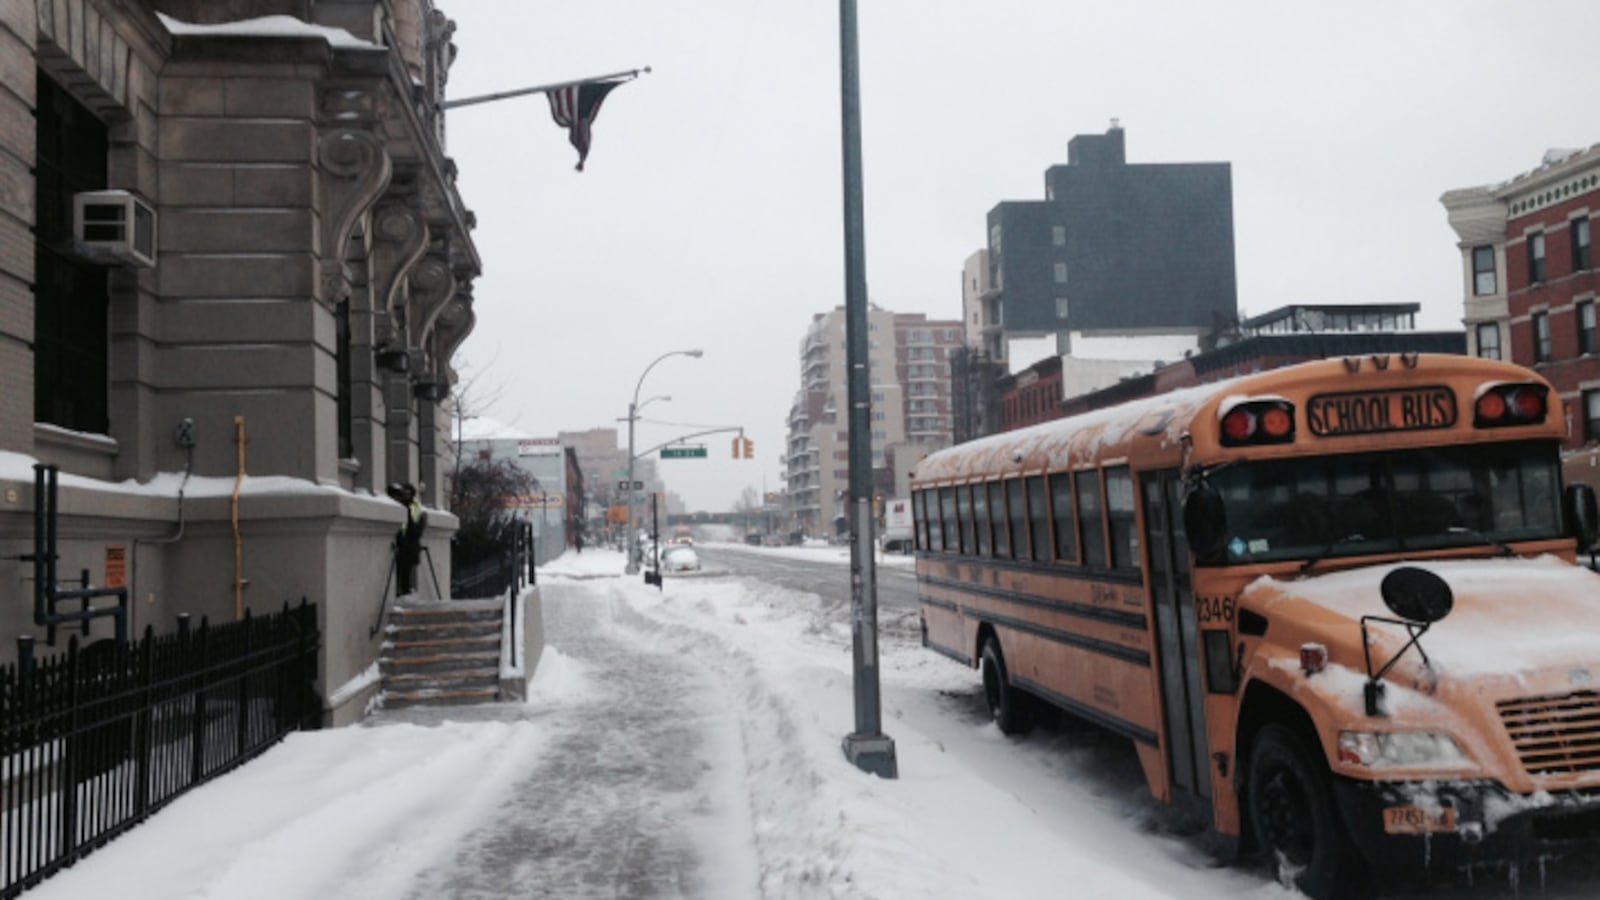 A scene from a snowy day in 2014 .